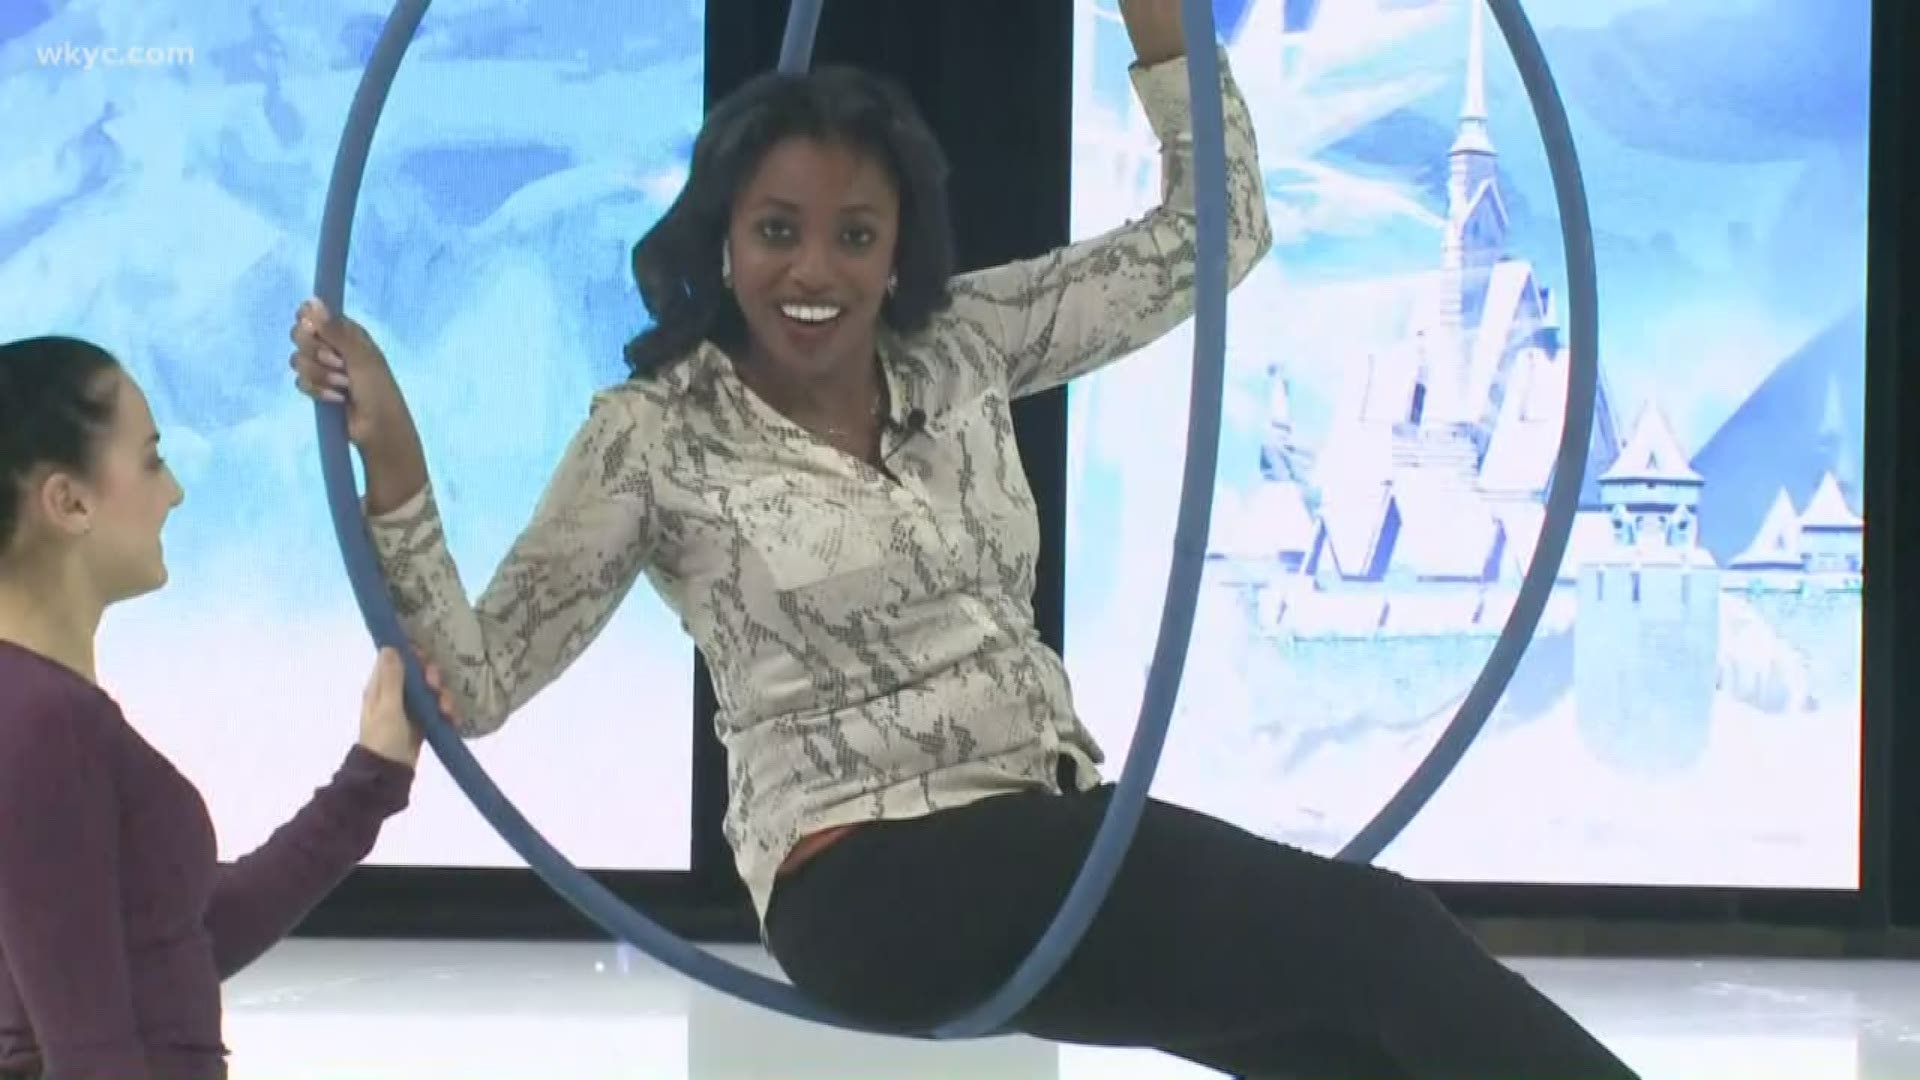 Jan. 16, 2020: Seriously. This is so much fun. Watch as 3News' Jasmine Monroe takes on the challenge of a spinning ring at Disney On Ice.